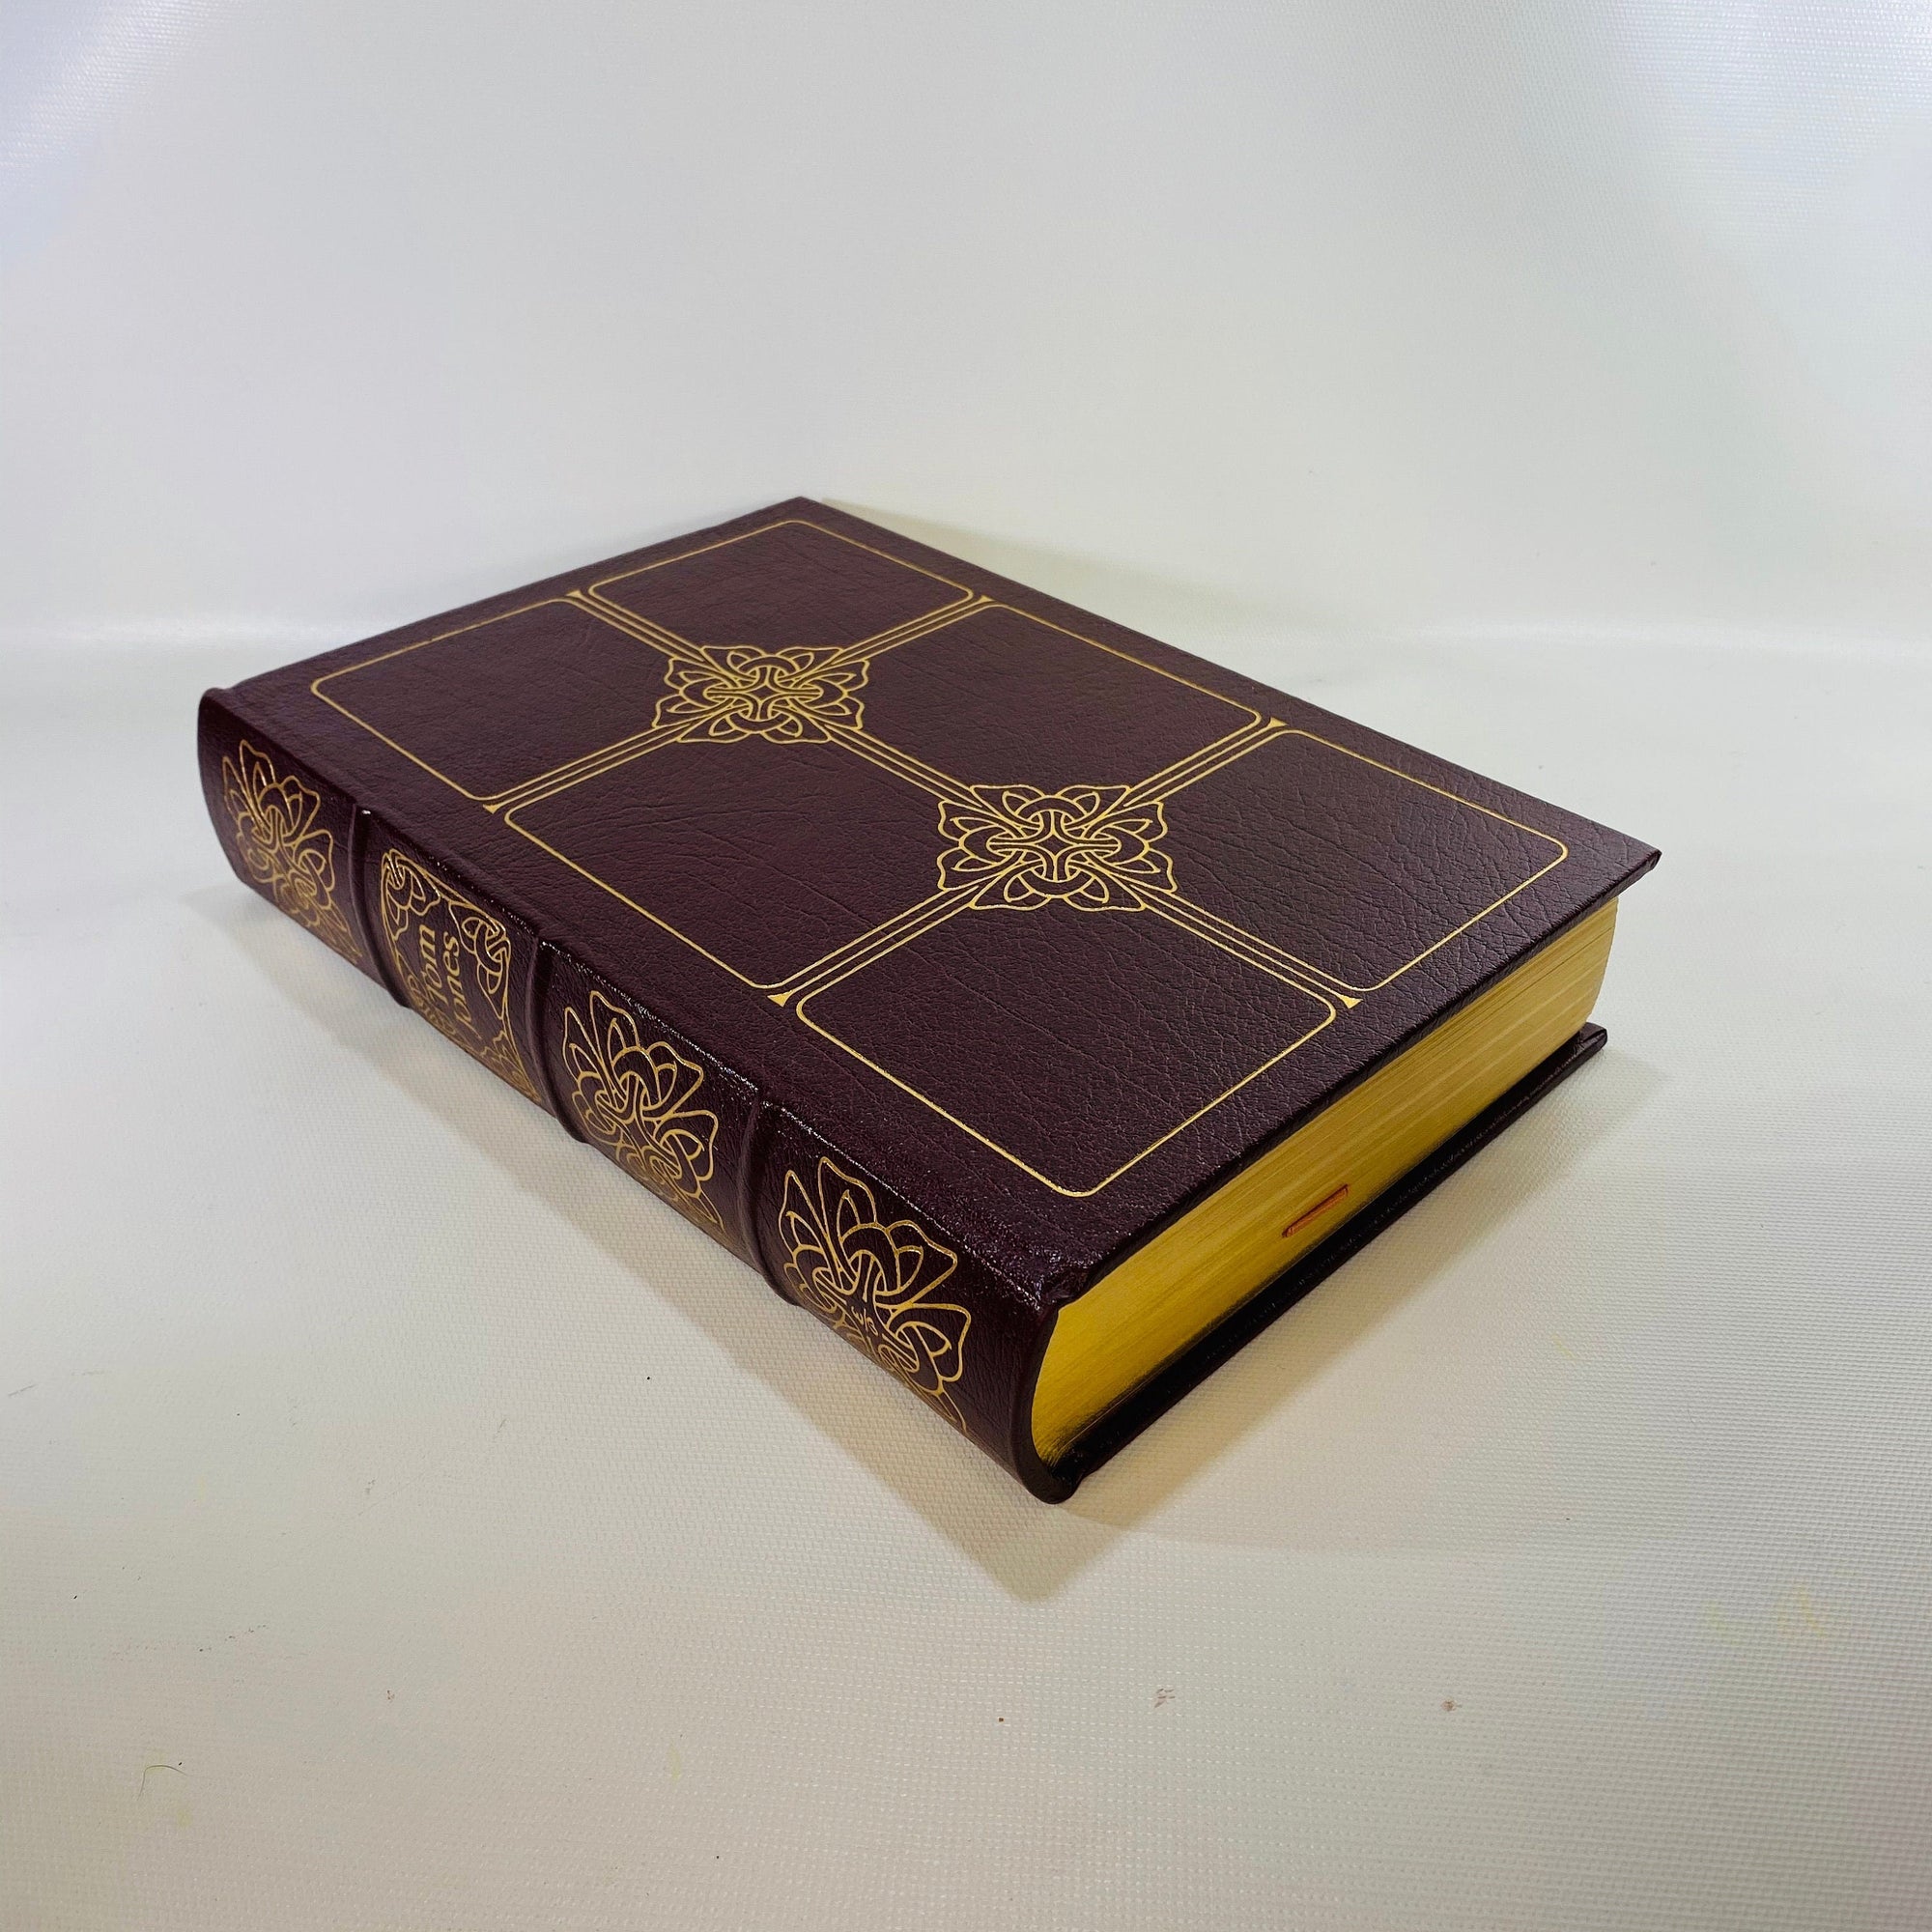 The History of Tom Jones A Foundling Novel by Henry Fielding 1979 Vintage Classic Easton Press Collectable Leather Bound Book Gold Gilt Page